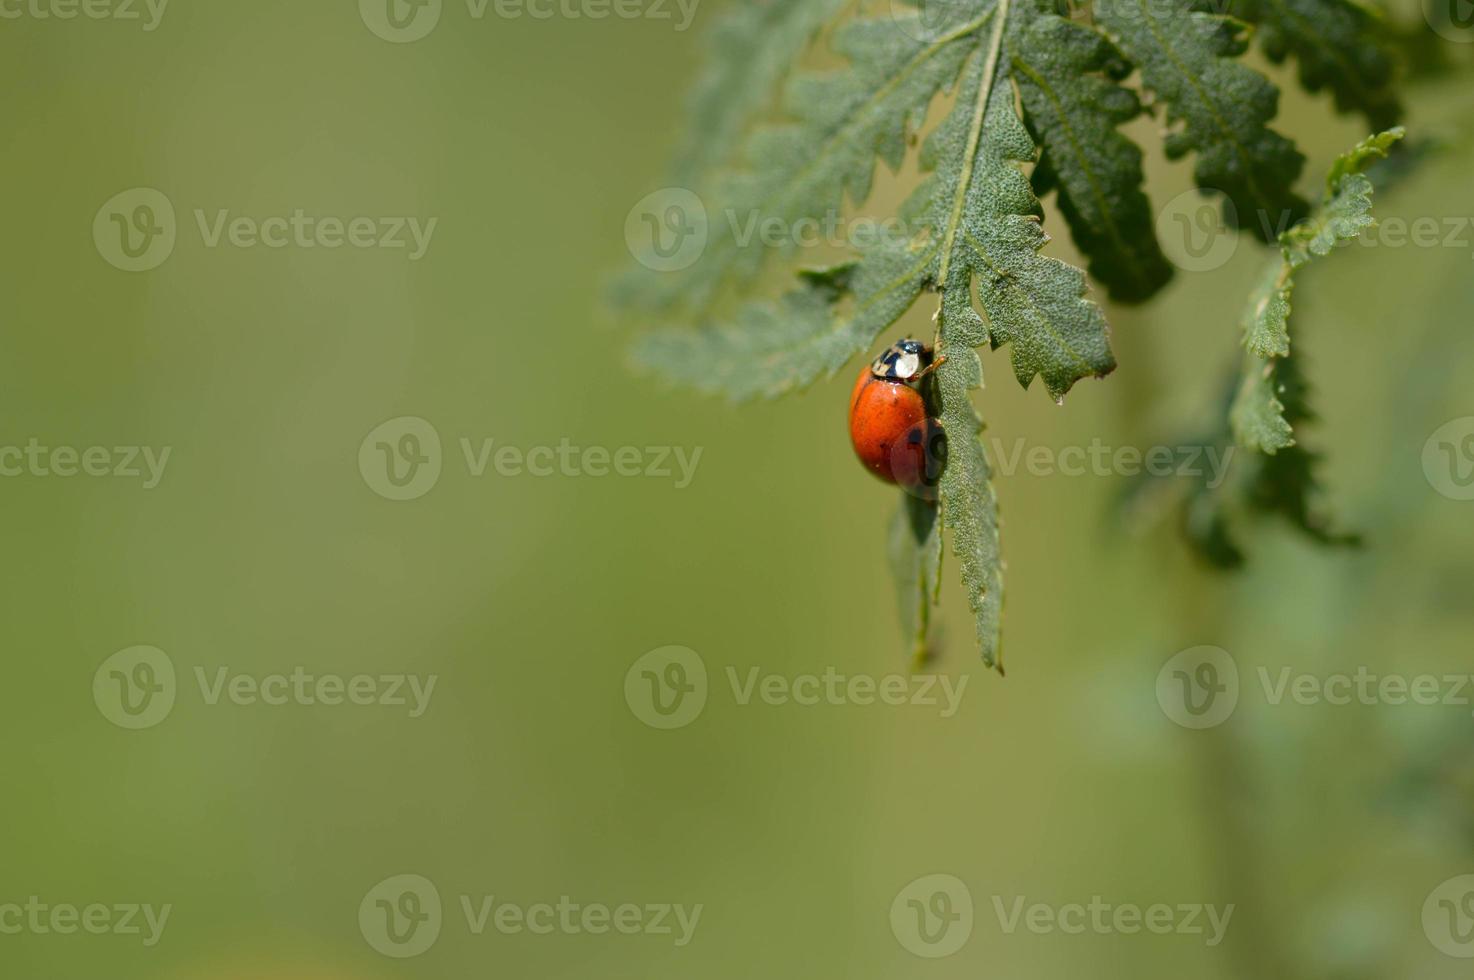 Ladybug on a green leaf in nature, green background photo